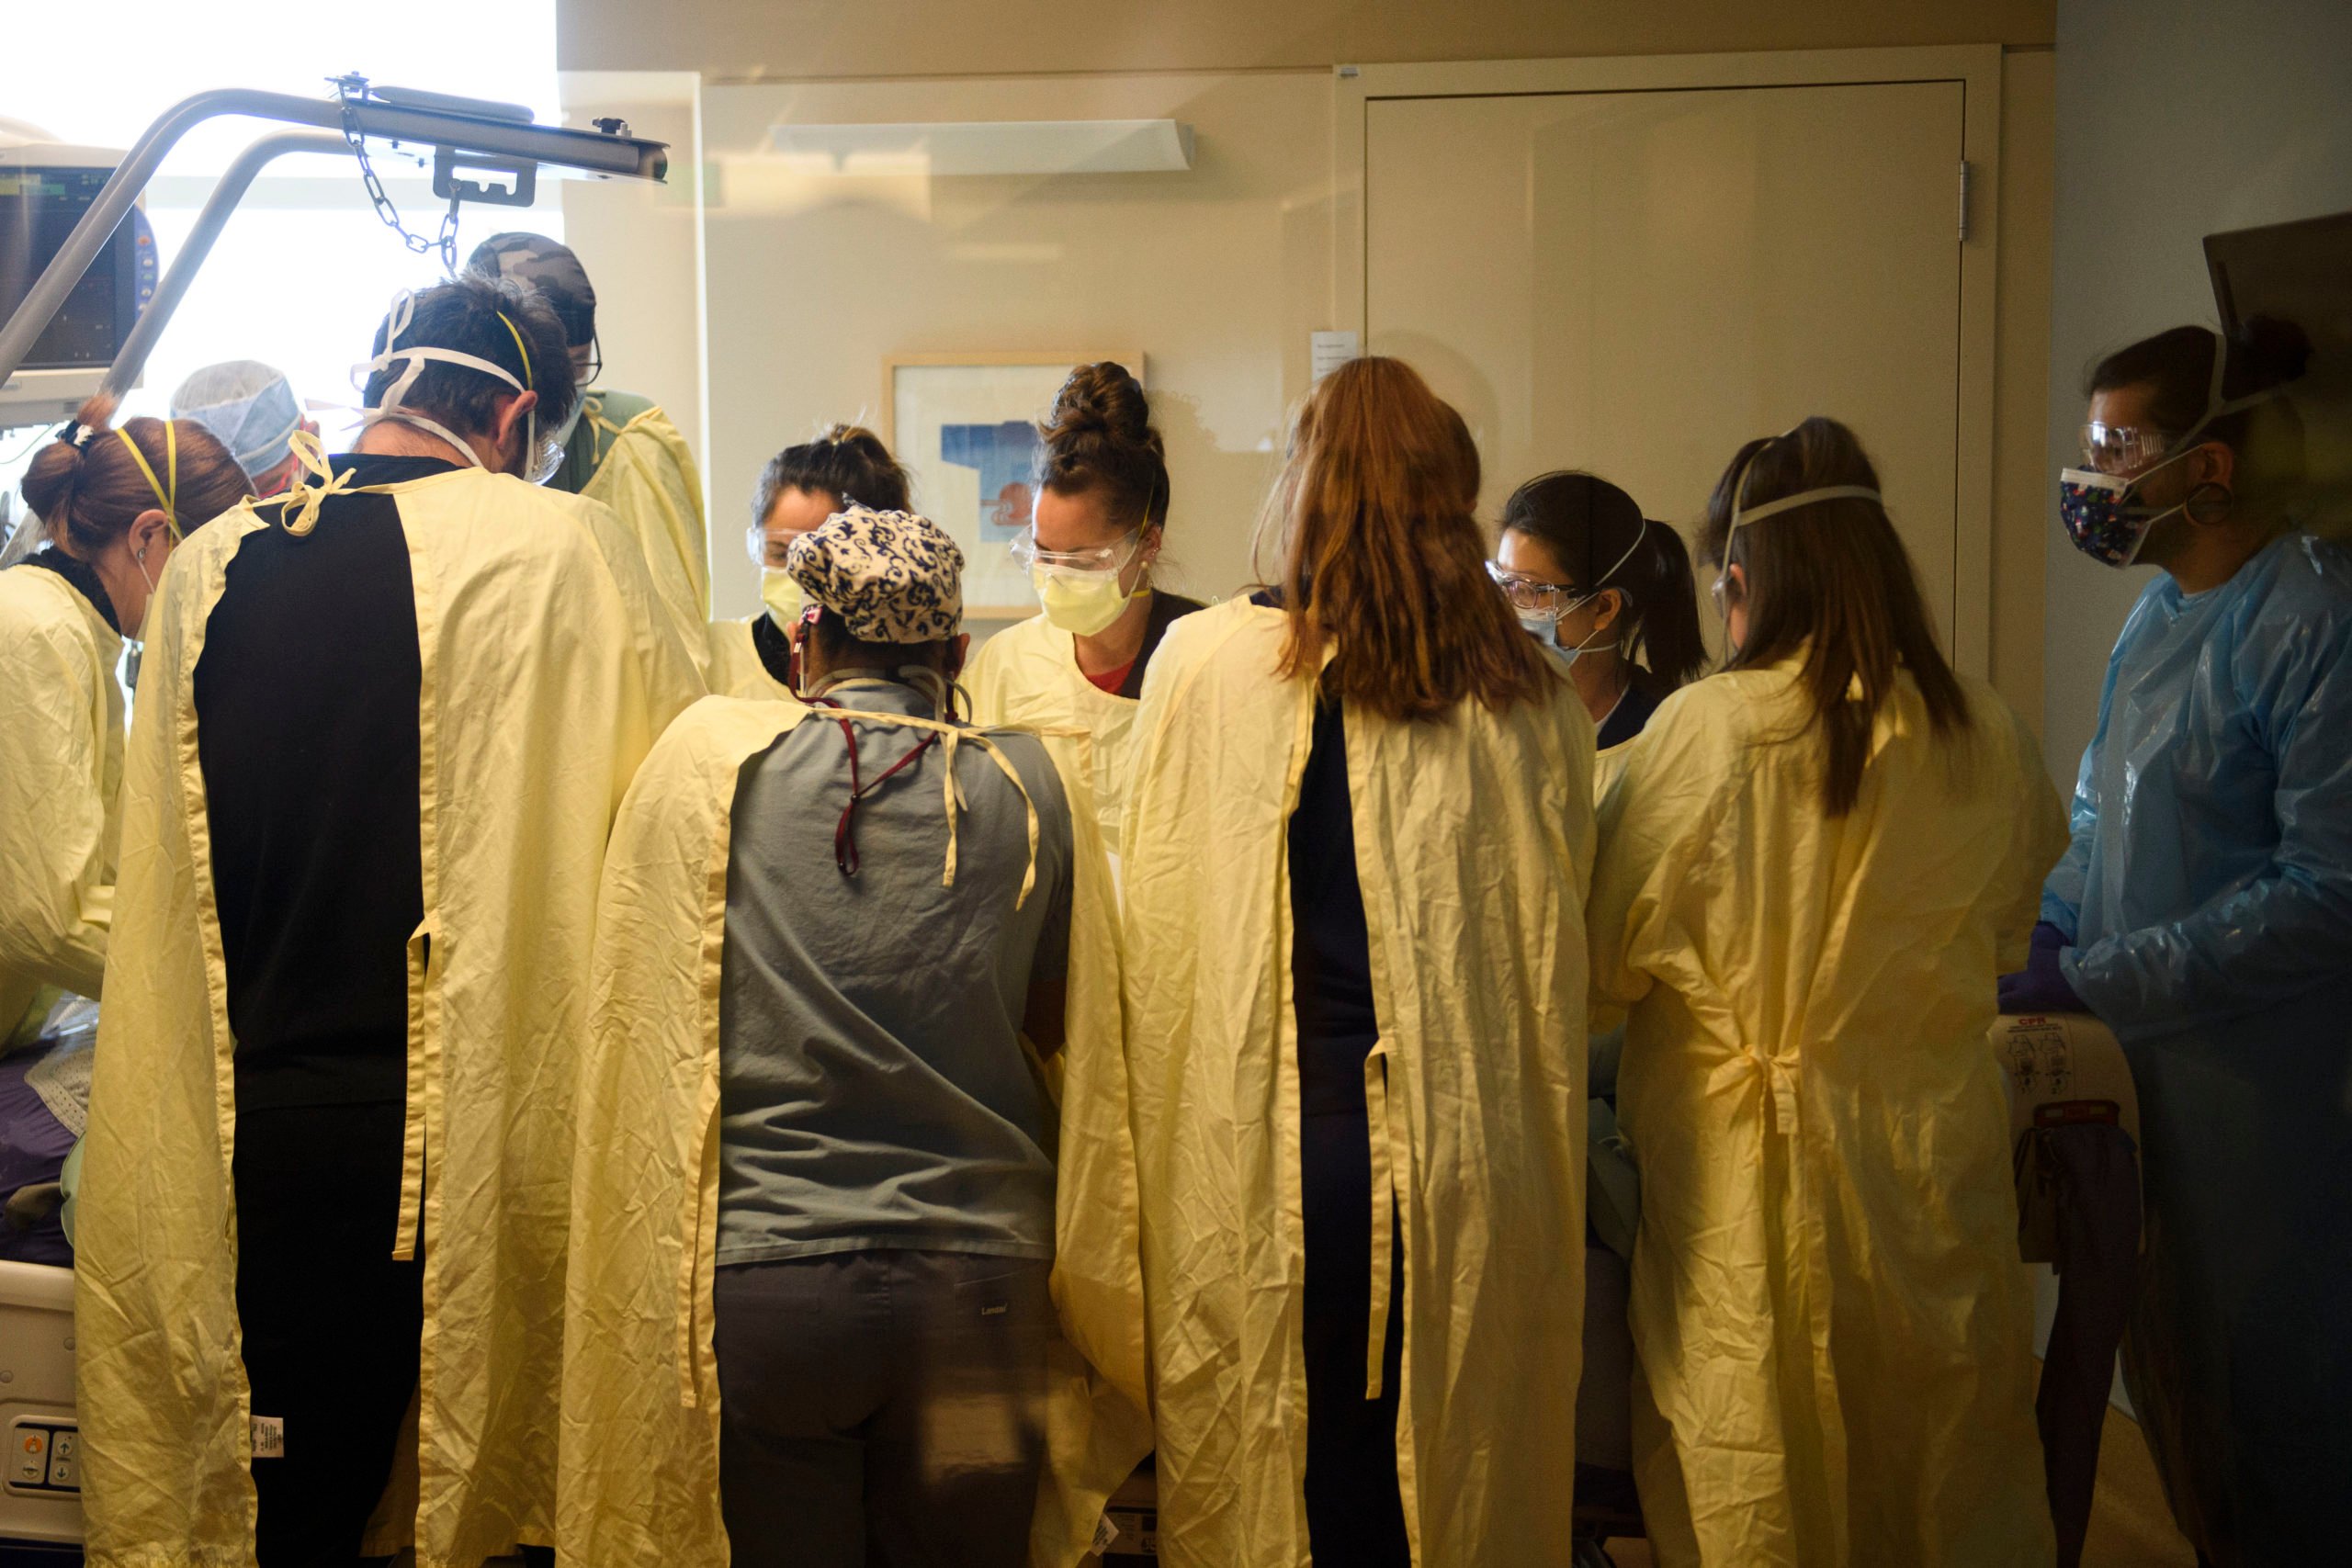 A team of health care workers including physicians, nurses, certified nursing assistants, and respiratory specialists wear personal protective equipment (PPE) while turning a patient from their stomach onto their back in the Covid-19 intensive care unit (ICU) at Renown Regional Medical Center on December 16, 2020 in Reno, Nevada. - Renown Health converted two floors of a parking garage into an alternative care site for Covid-19 patients to increase hospital capacity amid a surge in cases, allowing other facilities to be used for patients in more serious condition. The site included the addition of flooring, electrical infrastructure, lighting, water, technology, sanitation, and ventilation. President Trump earlier this month retweeted a tweet that described Renown's structure as "the fake Nevada parking garage hospital" due to a lack of patients in the picture taken before the facility opened. The site is for patients that have mild to moderate Covid-19 cases and do not require critical care, with 24 patients currently and 350 patient visits to date. (Photo by Patrick T. Fallon / AFP) (Photo by PATRICK T. FALLON/AFP via Getty Images)